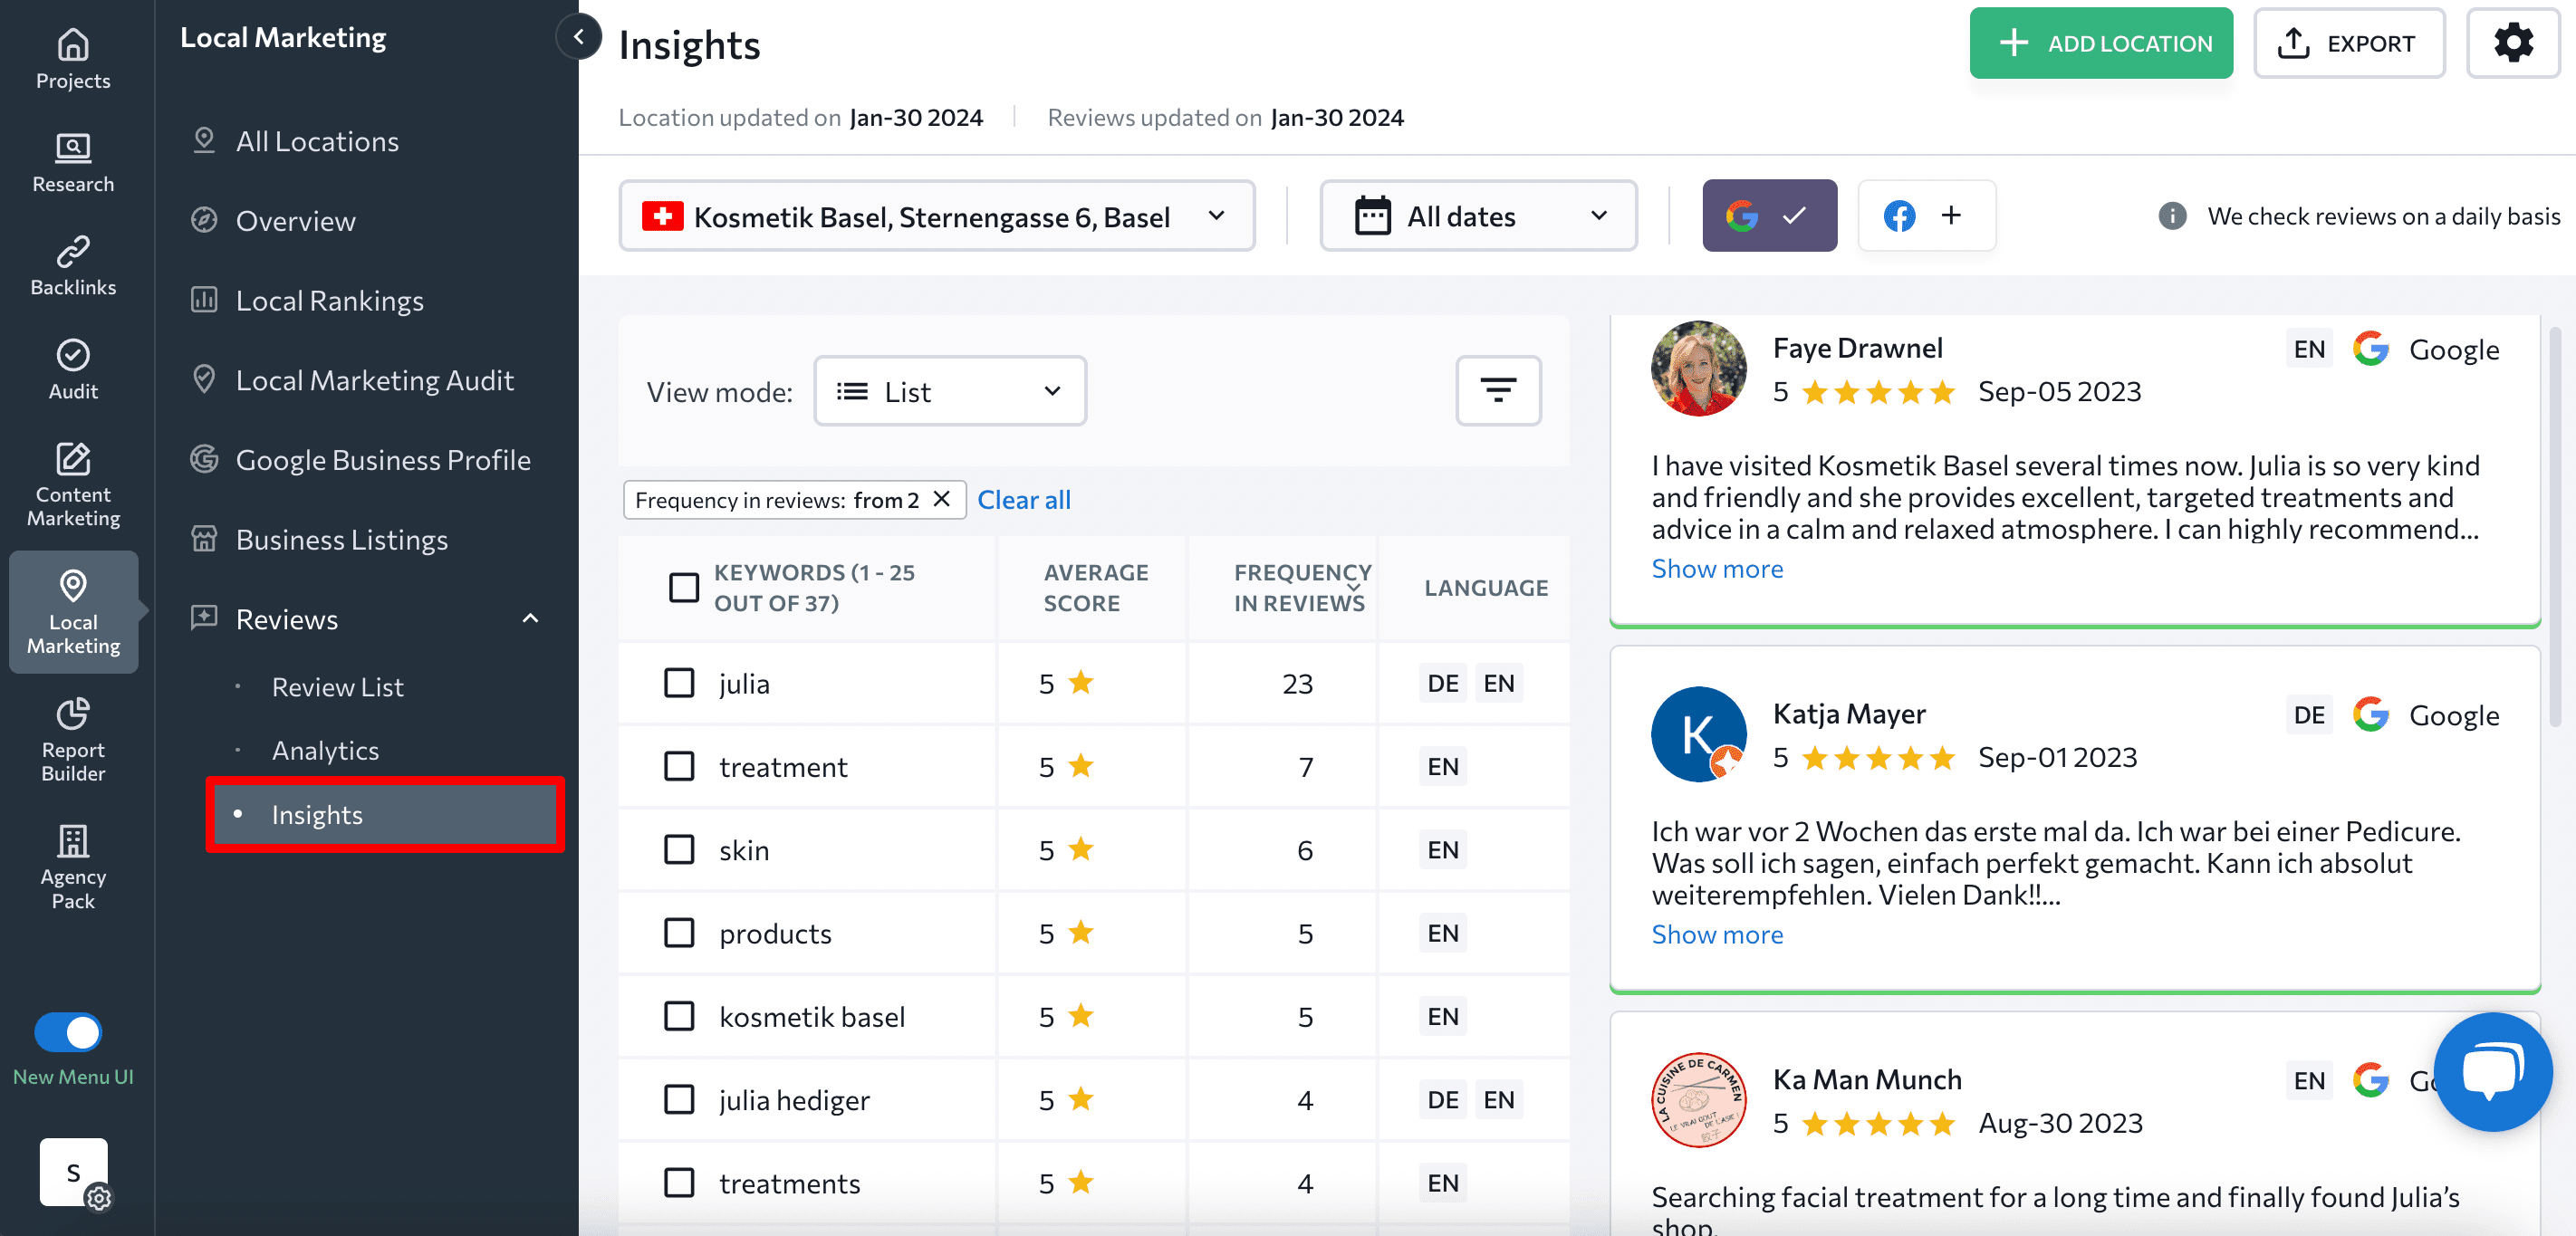 Insights section in SE Ranking's Local Marketing